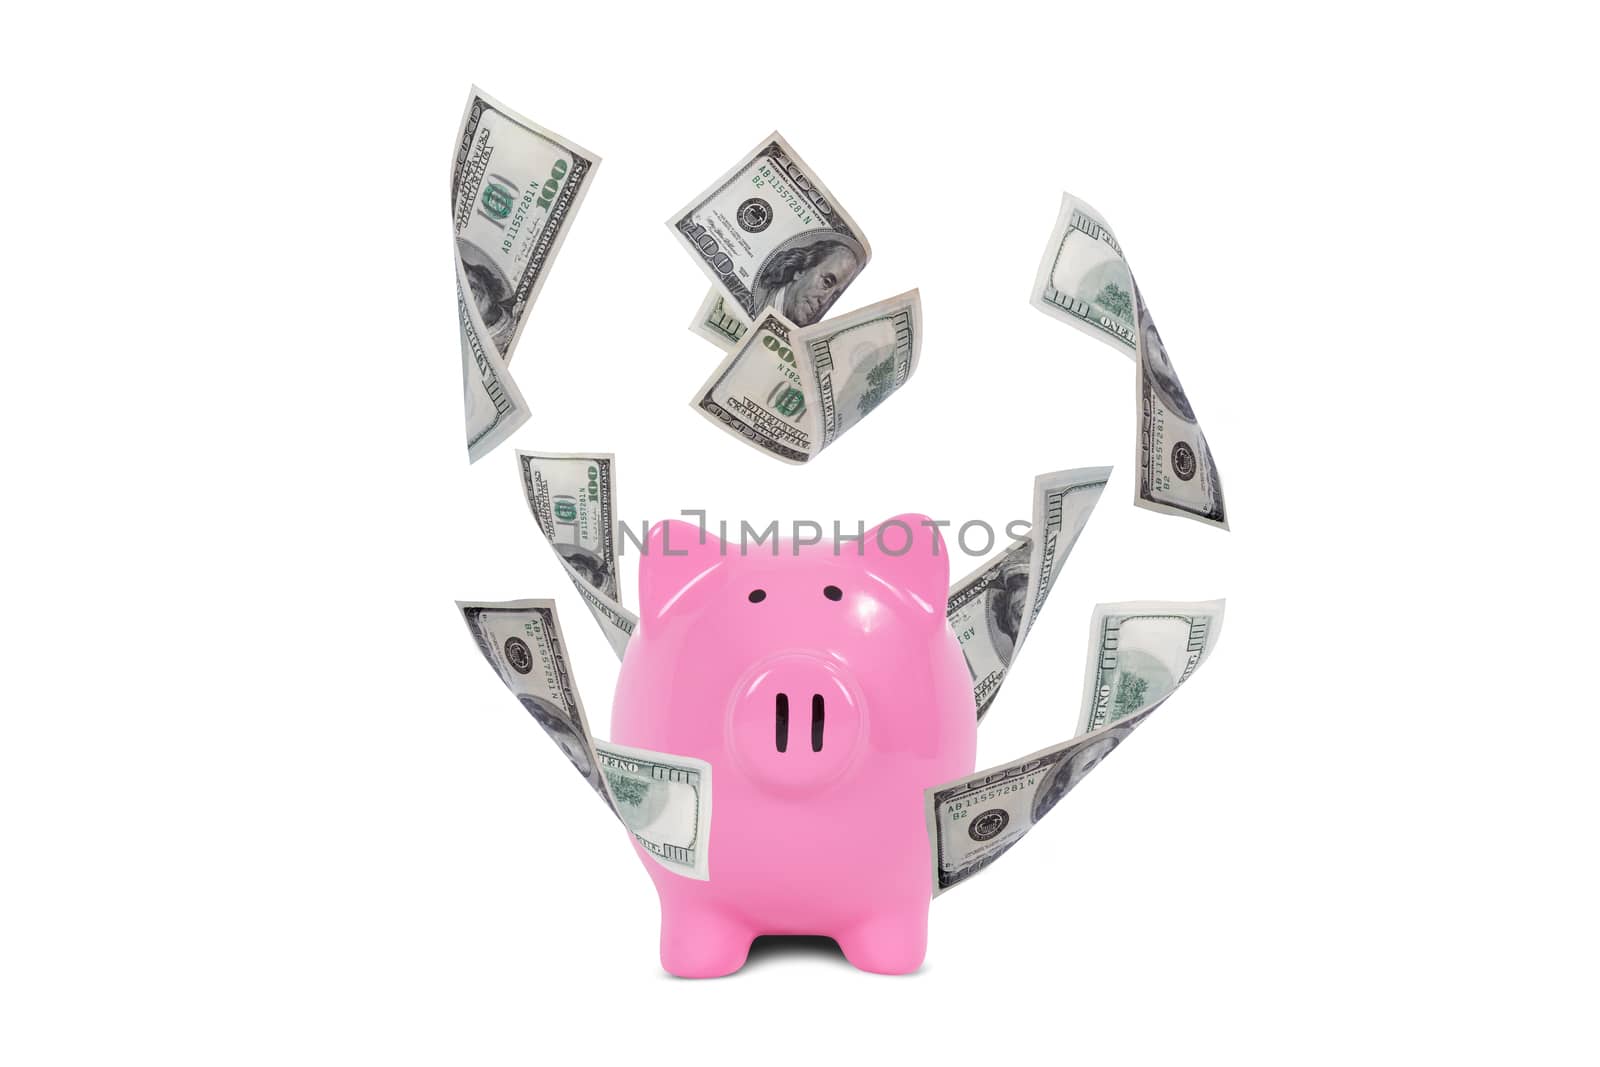 Saving finance concept, one hundred dollar money banknotes flying around pink piggy bank, isolated on white background.